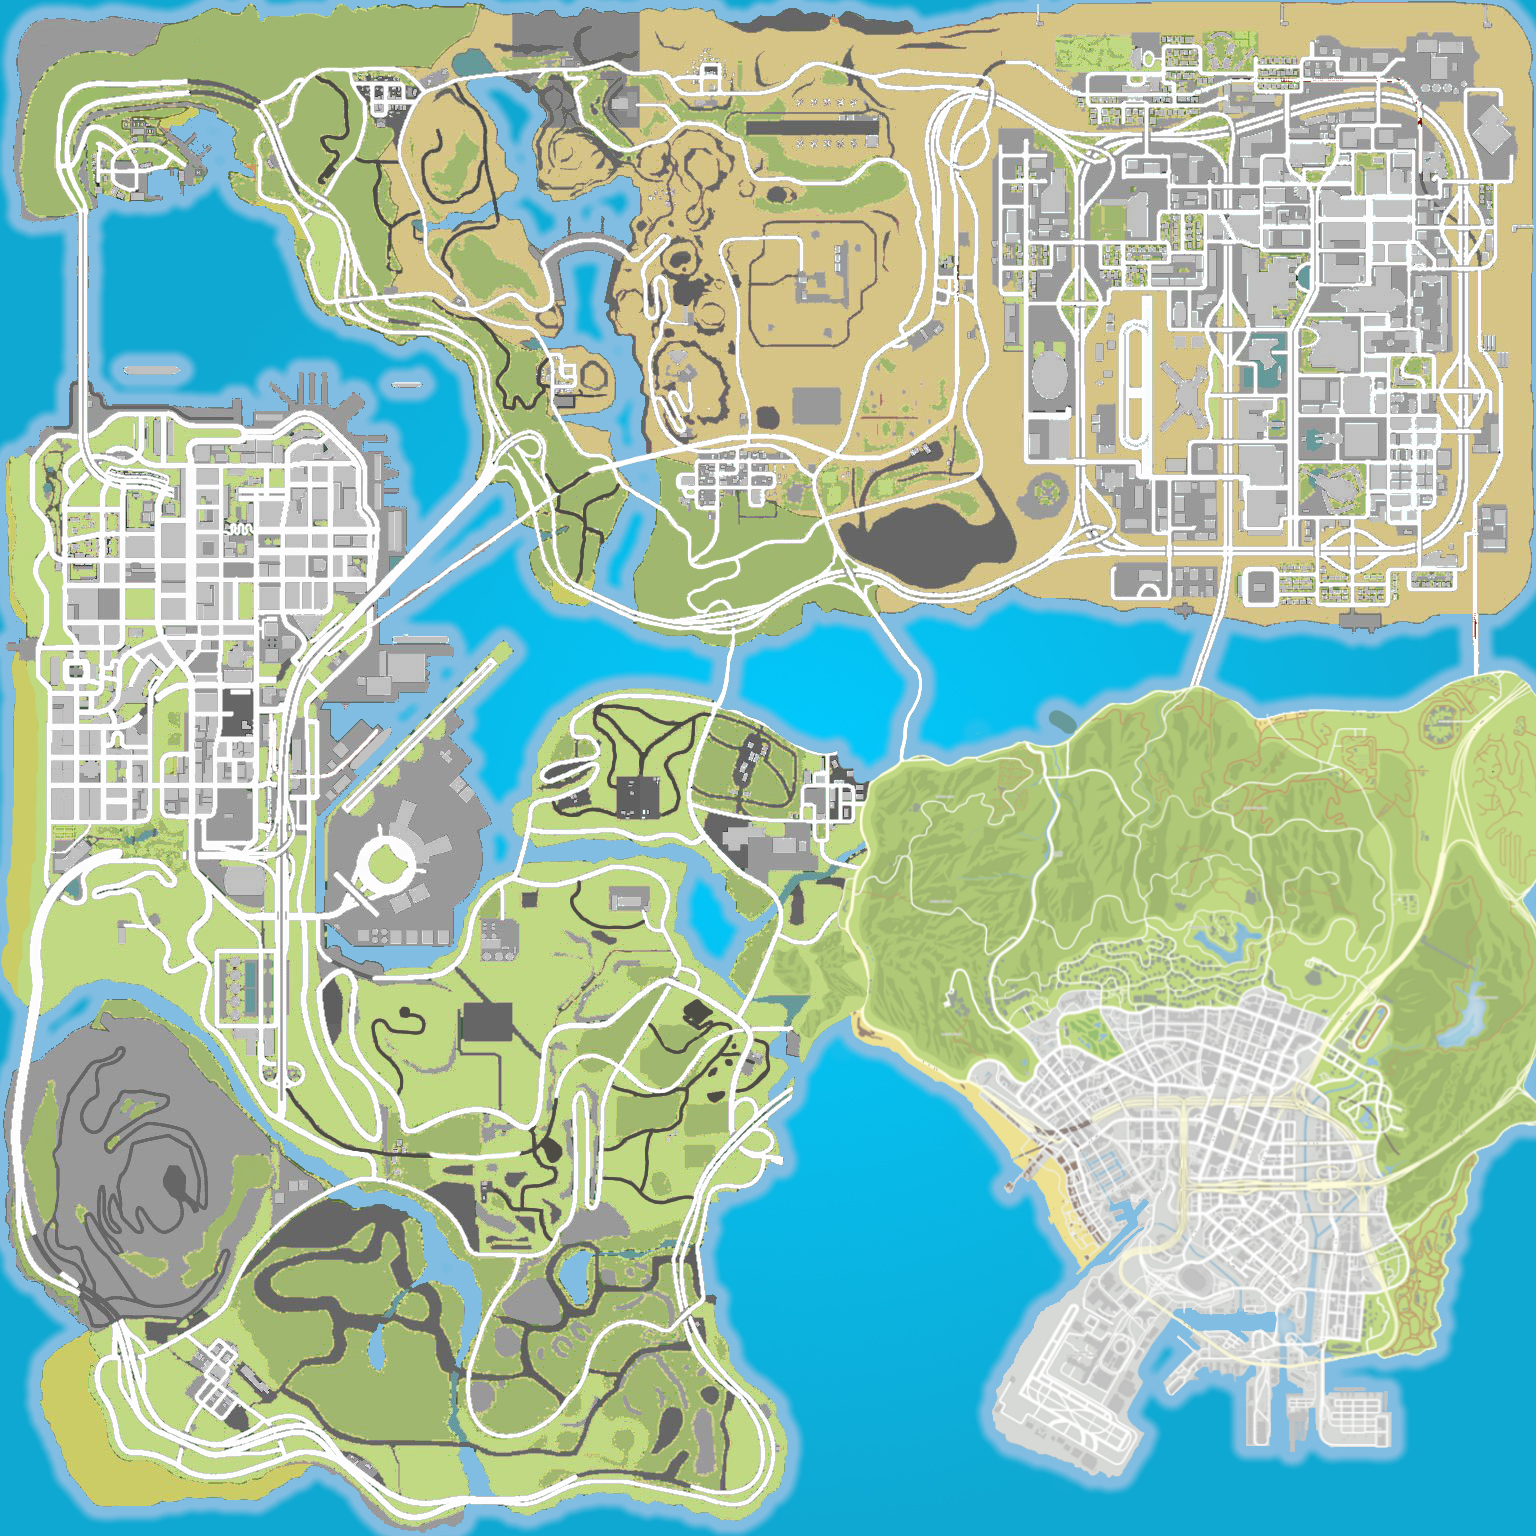  Map  of GTA  San Andreas Games Mapsland Maps  of the World